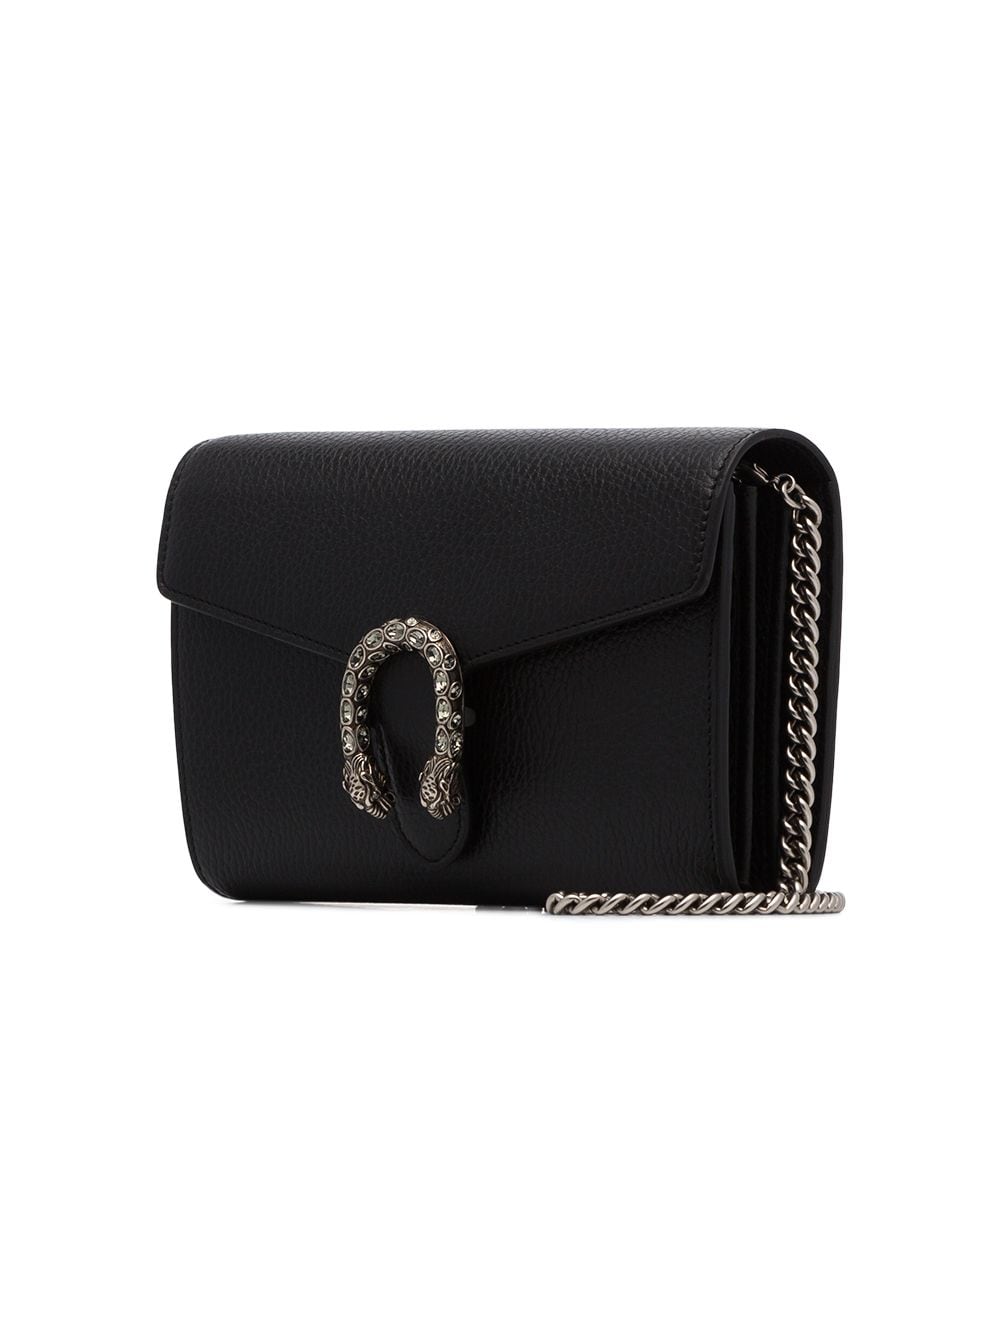 Gucci Dionysus Wallet on Chain Leather Mini Black